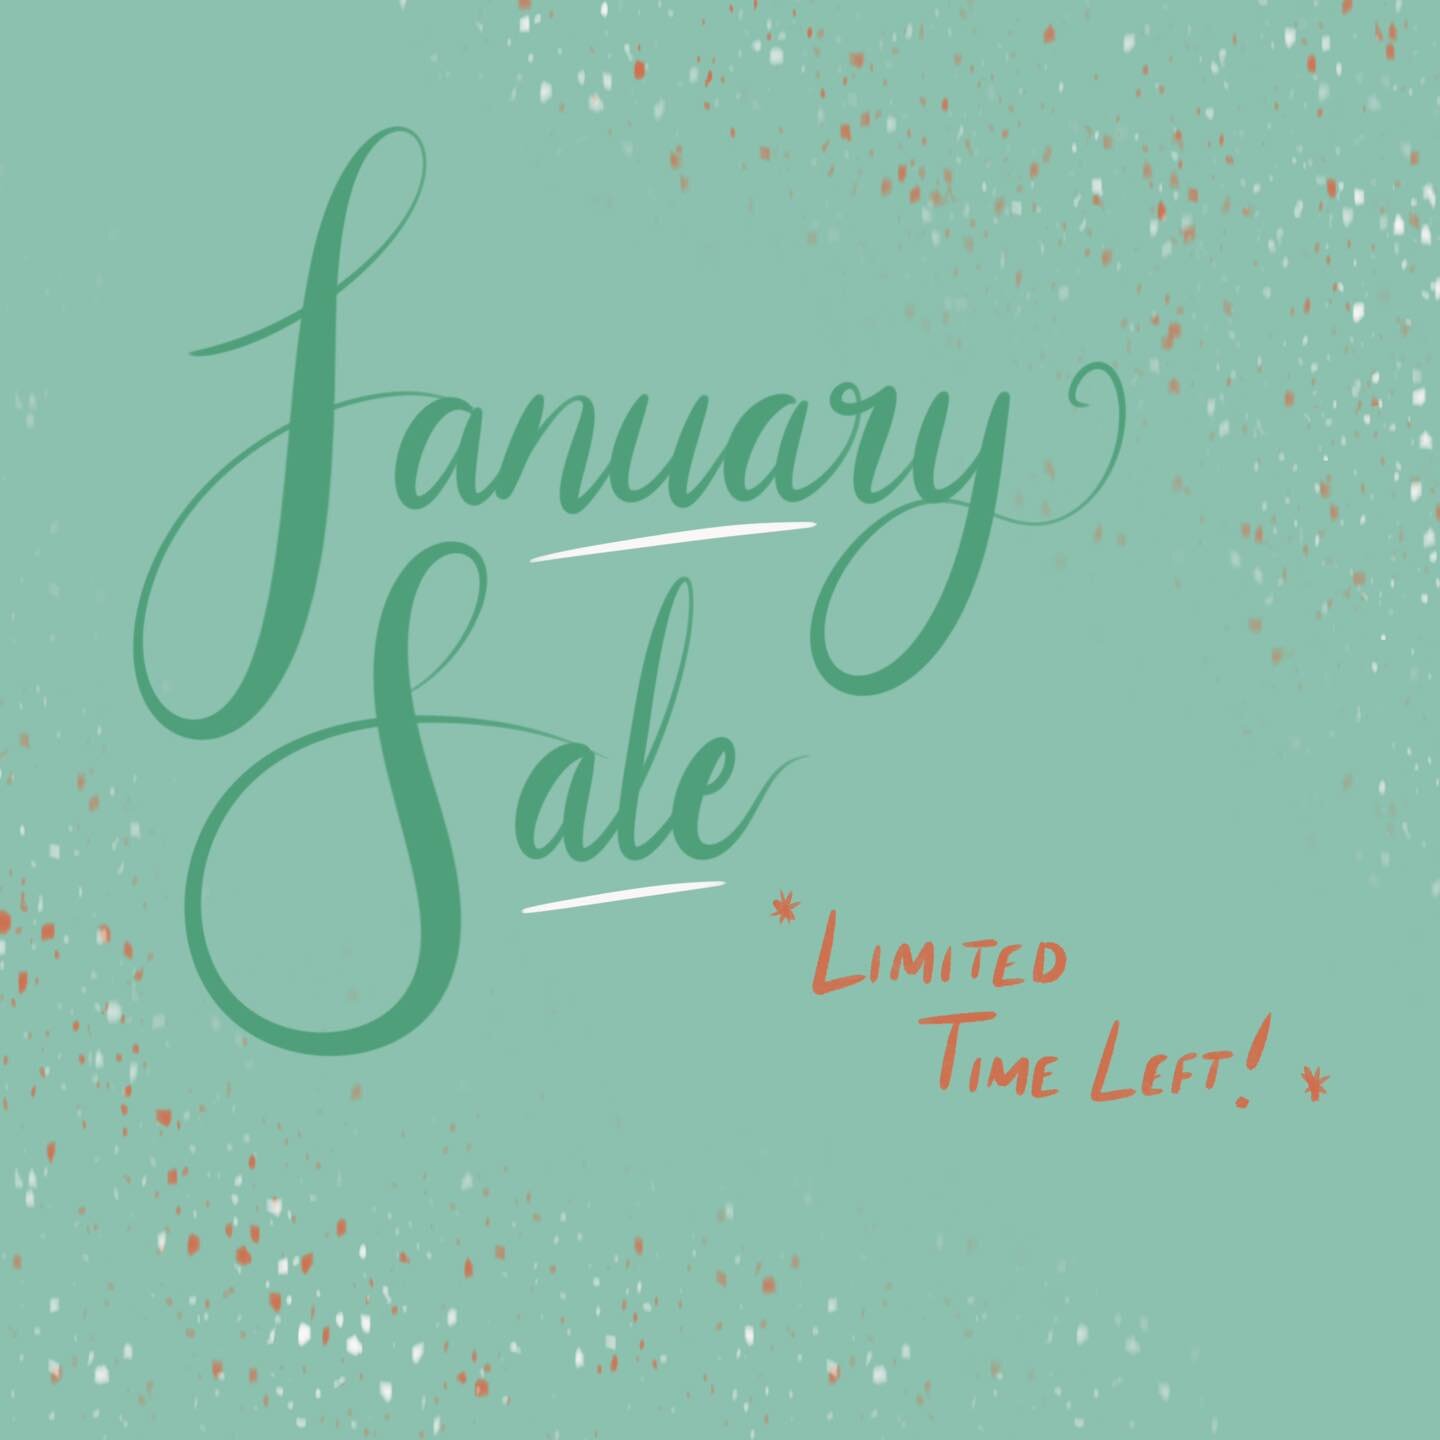 LIMITED TIME LEFT!
Yes that&rsquo;s right - we are already half way through January so that&rsquo;s means we are half way through my January sale! Never have I had a sale on for so long &hellip; so don&rsquo;t waste this chance to grab a gift, card o